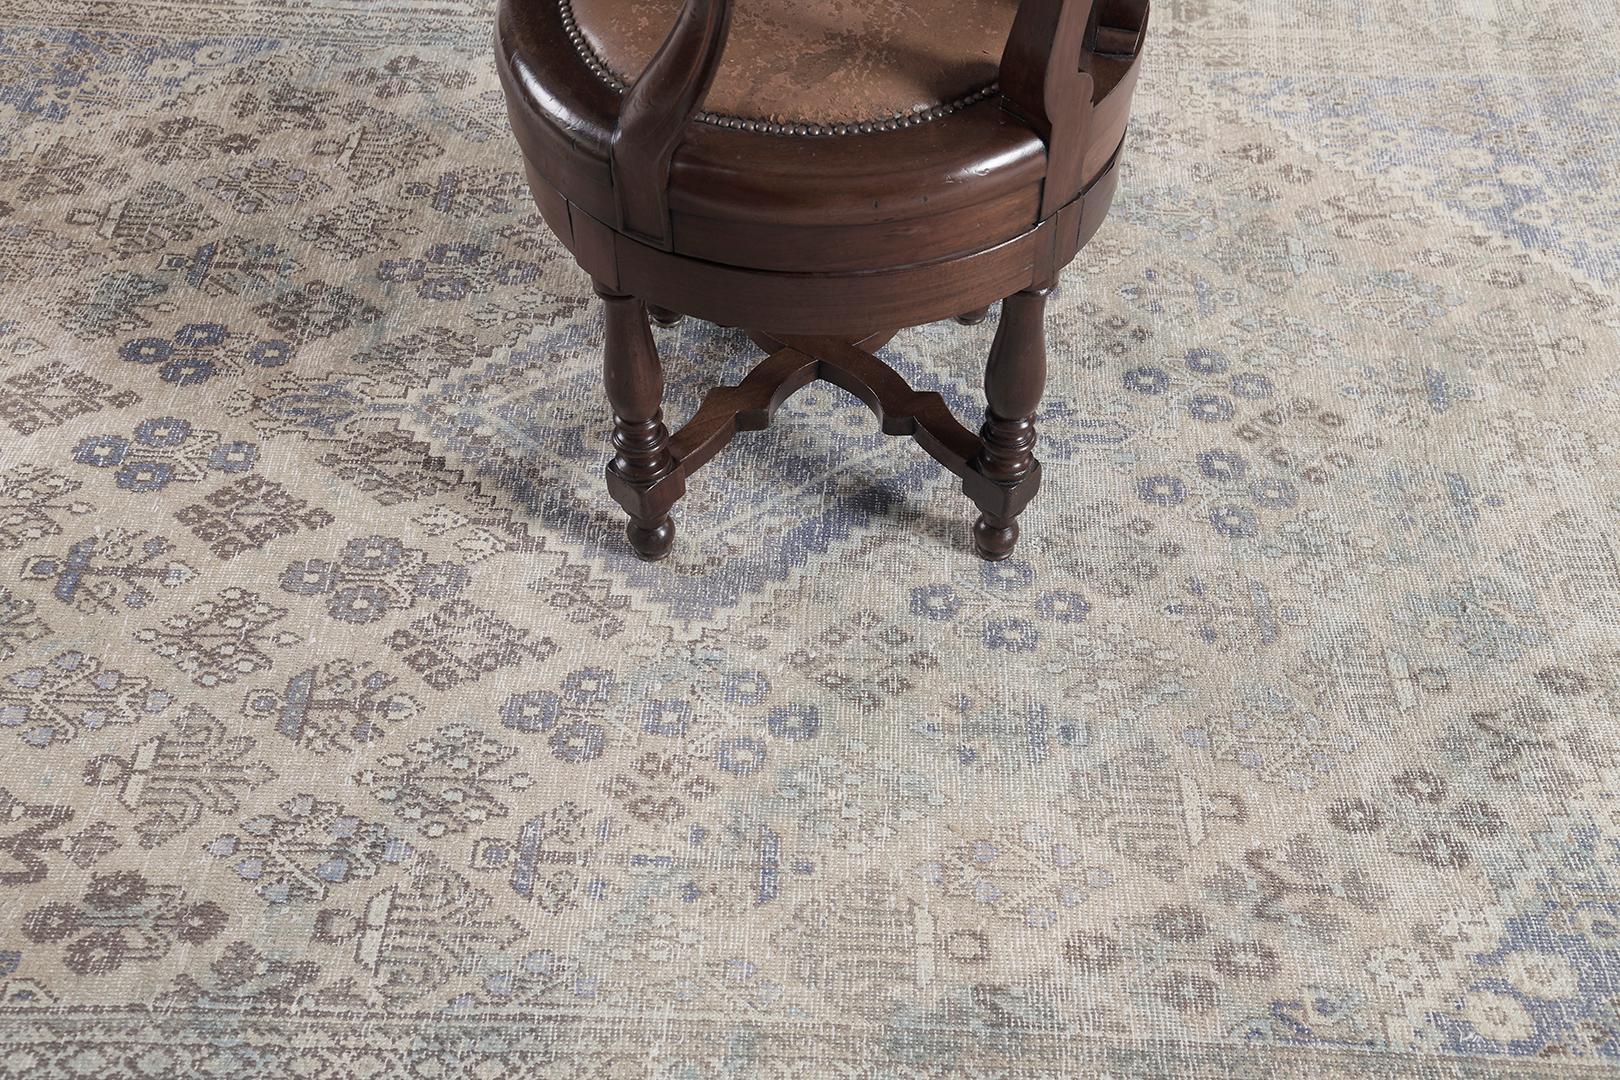 Refurbish your little sanctuary with our very own Joshegan Design rug made out of beautiful silk. All the blooming embellishments and symbolic elements blend and form into a stunning panel pattern. Its neutral tone palette added to the individuality